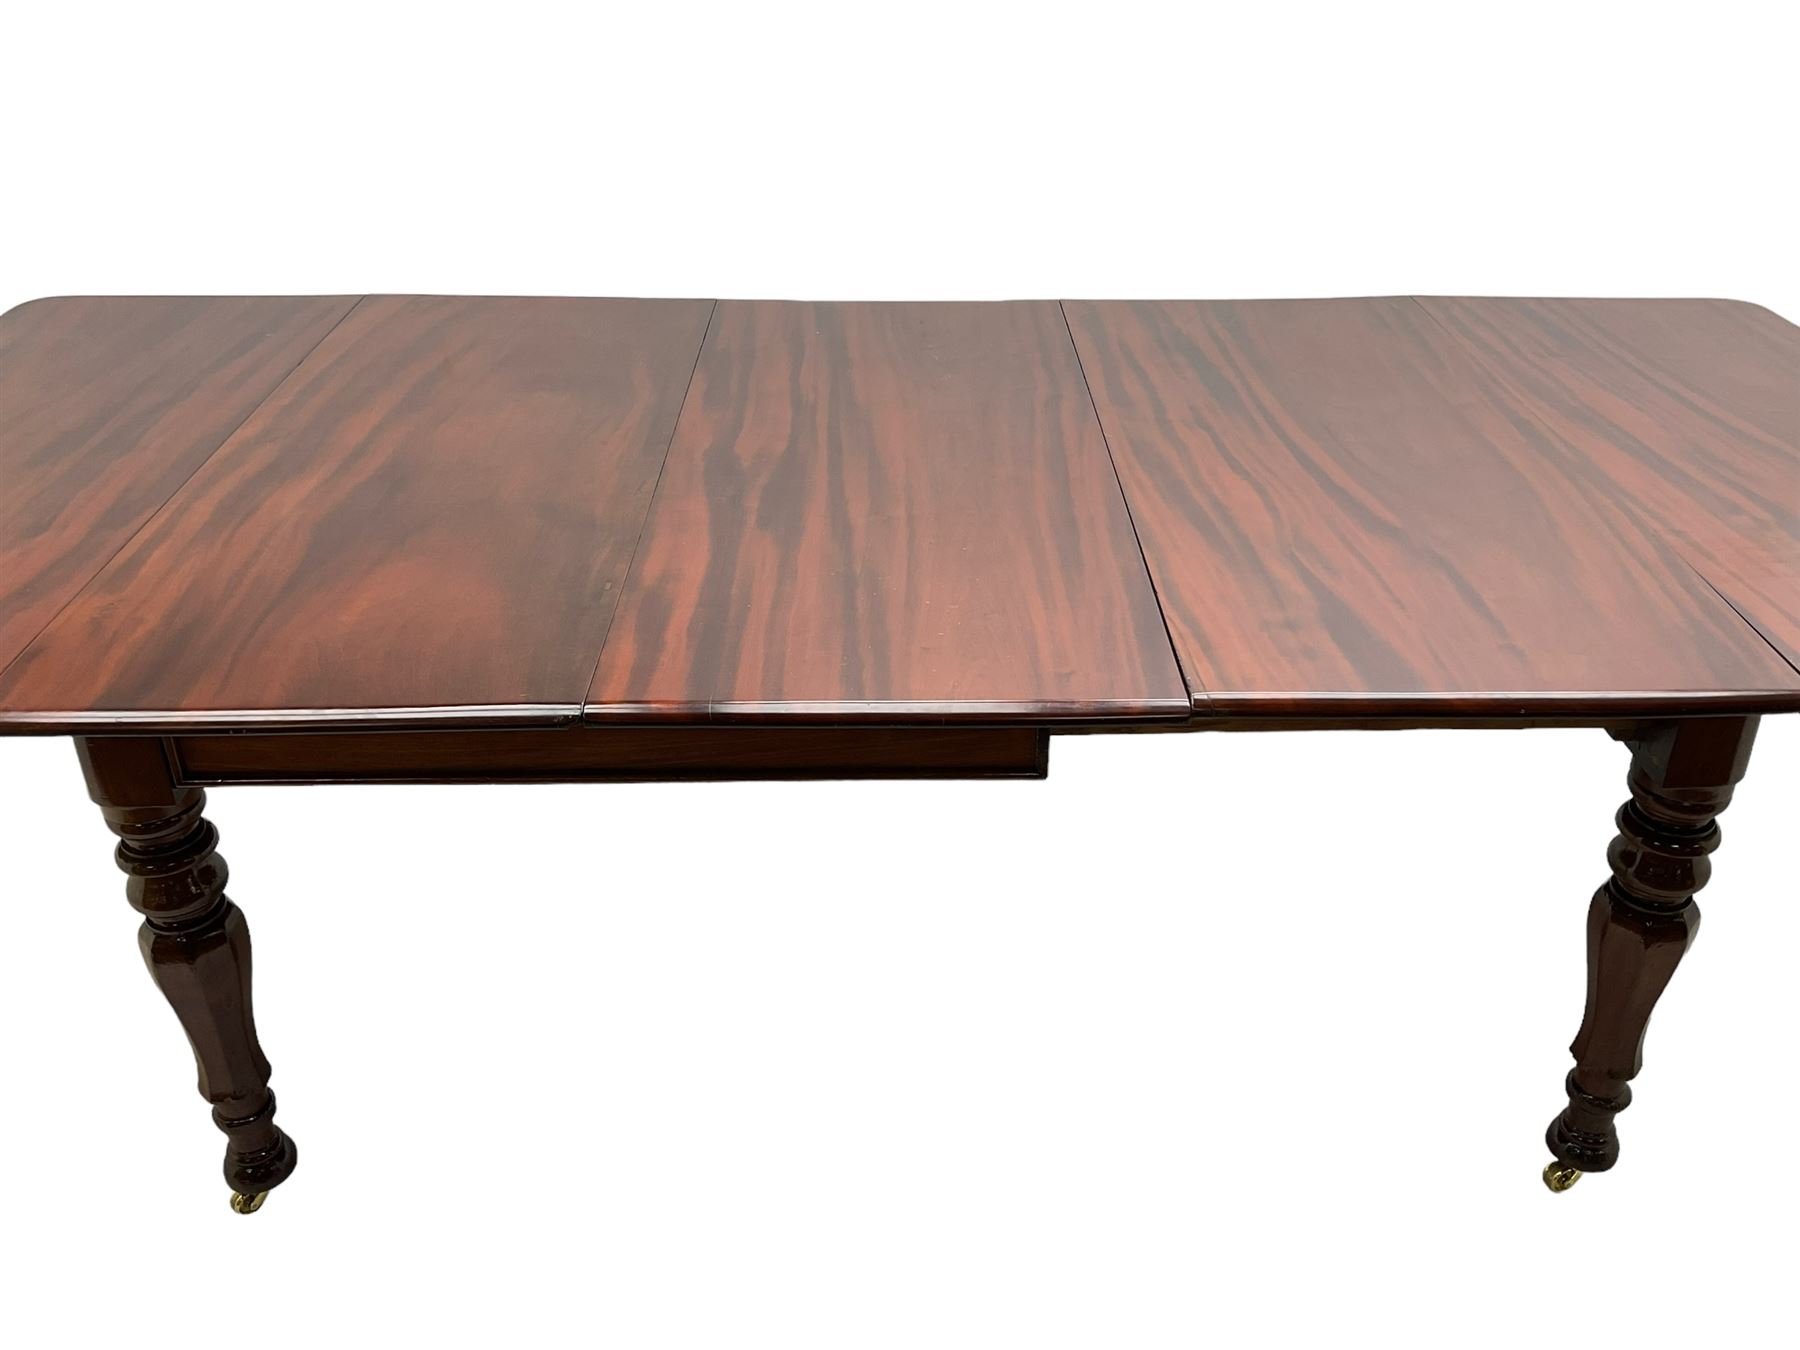 19th century mahogany extending dining table with three additional leaves - Image 3 of 15